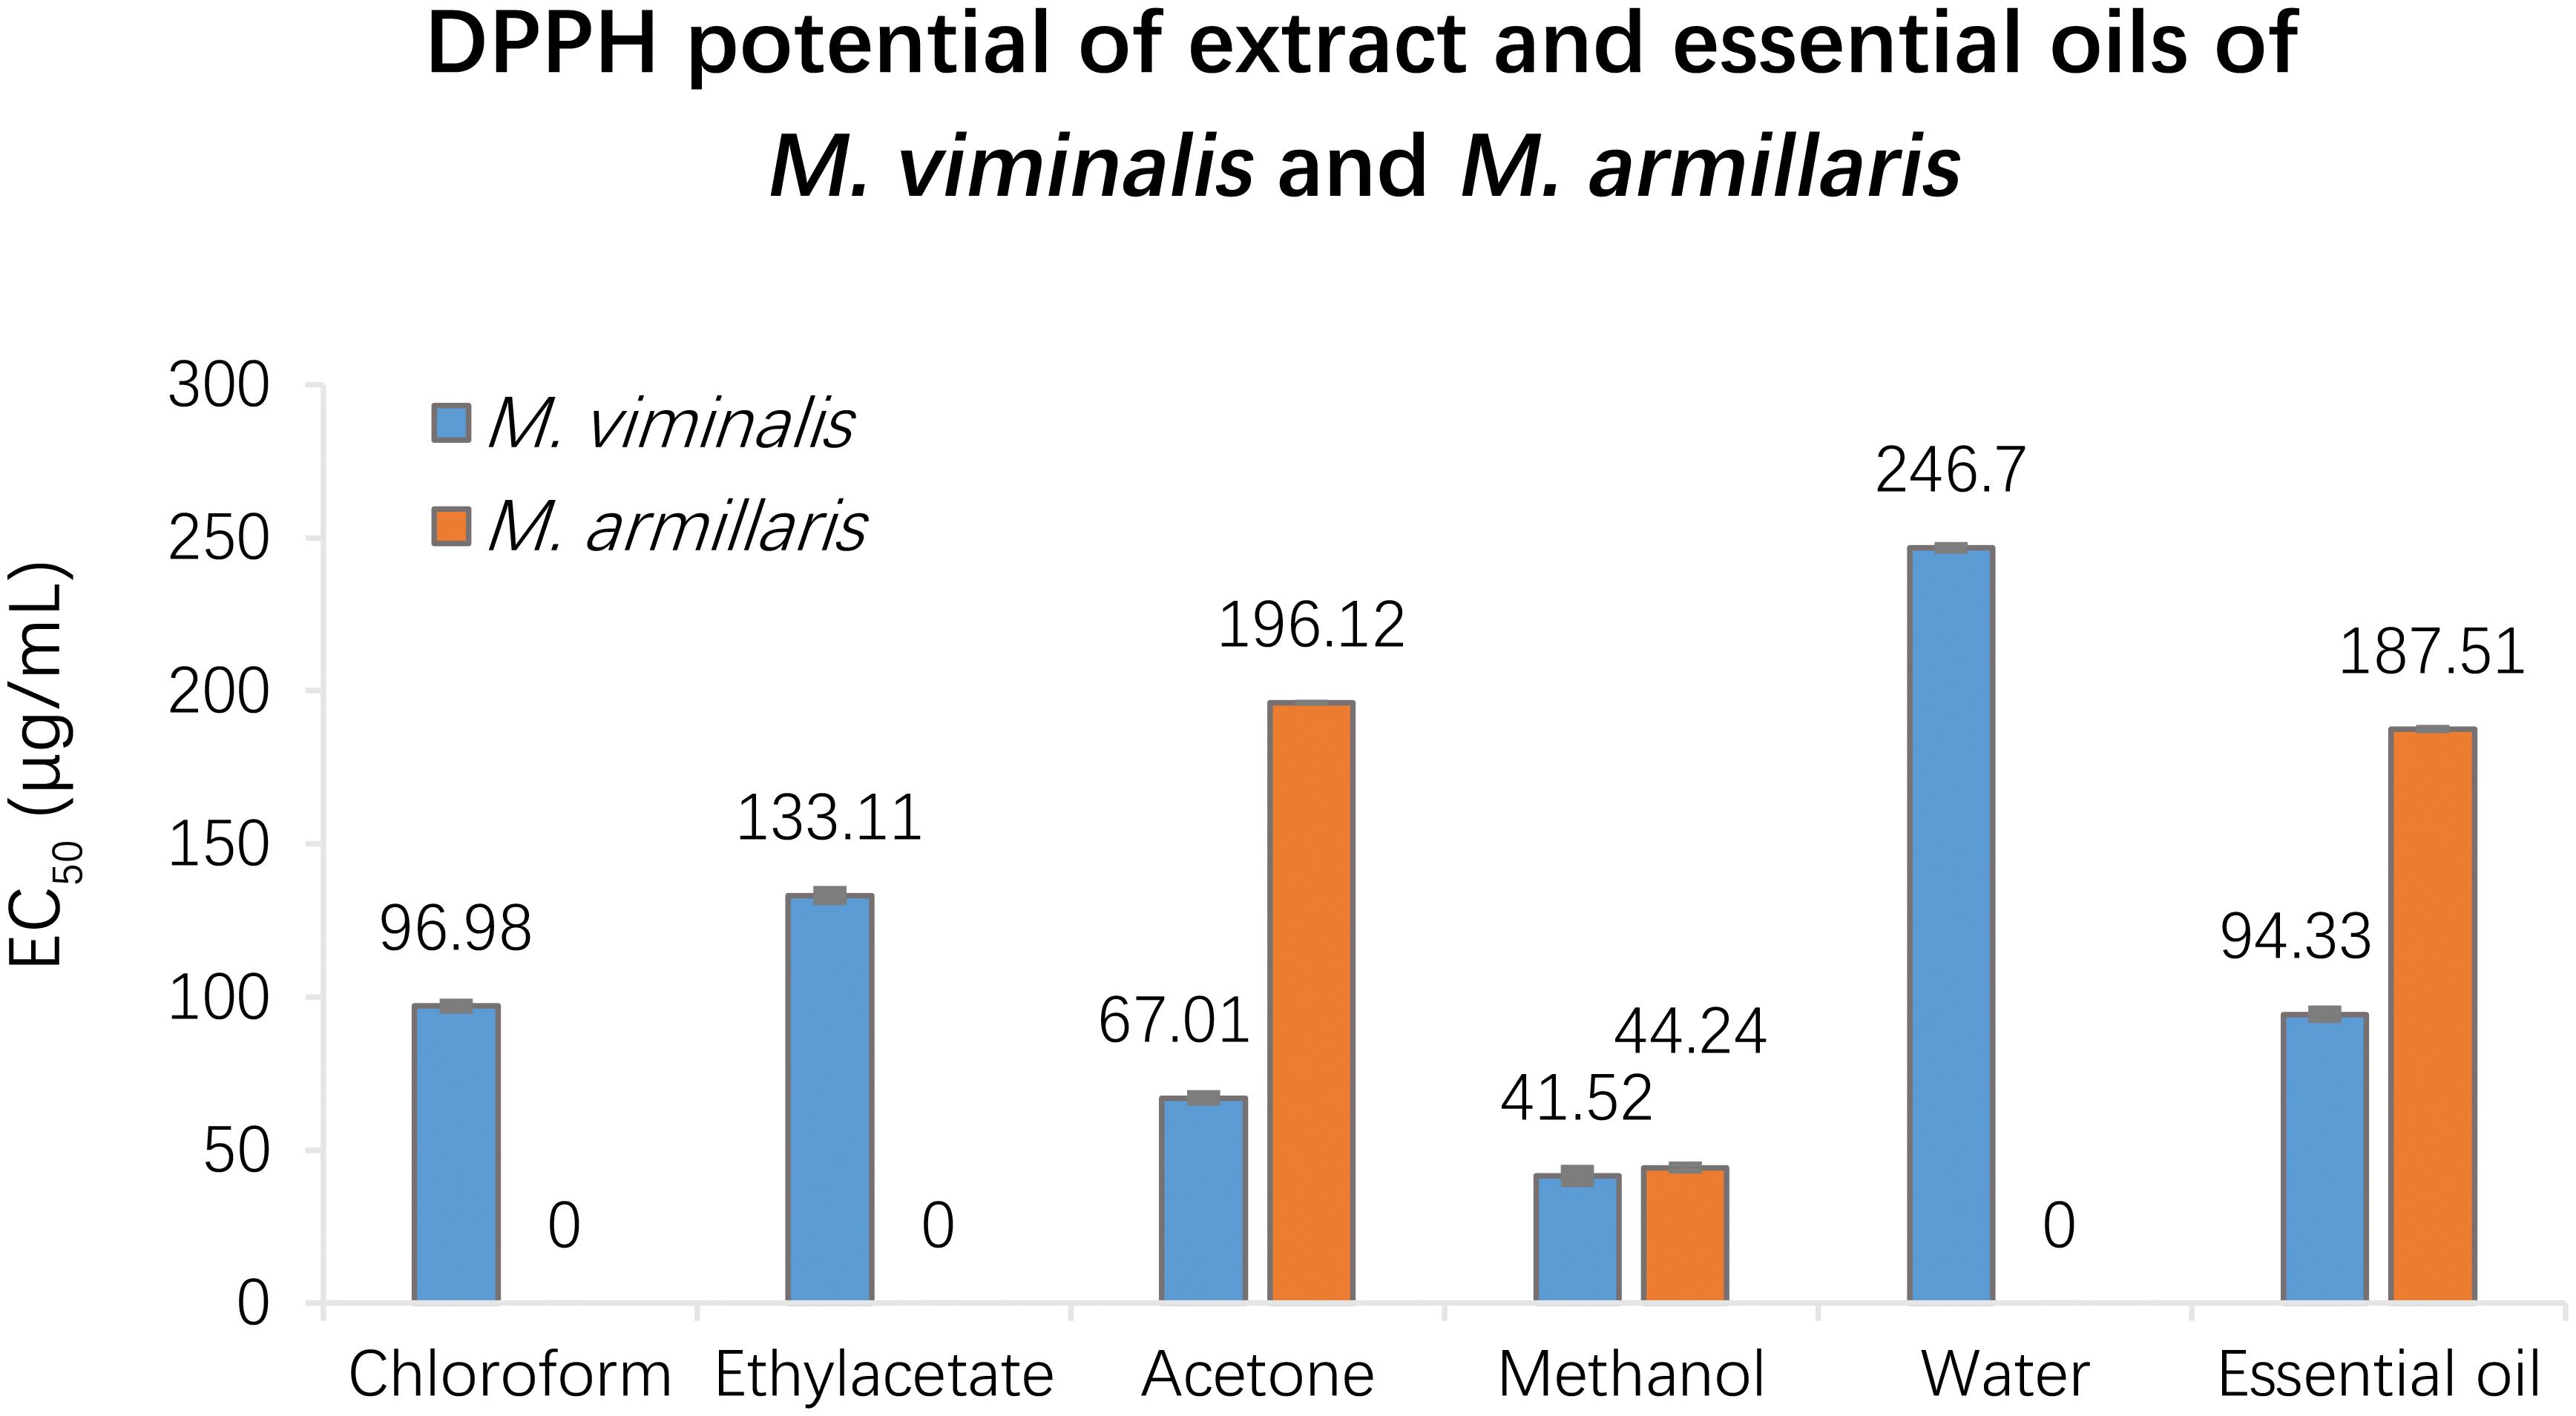 Free radical scavenging (DPPH) potential of extracts and essential oils of <italic>M. viminalisand M. armillaris.</italic>